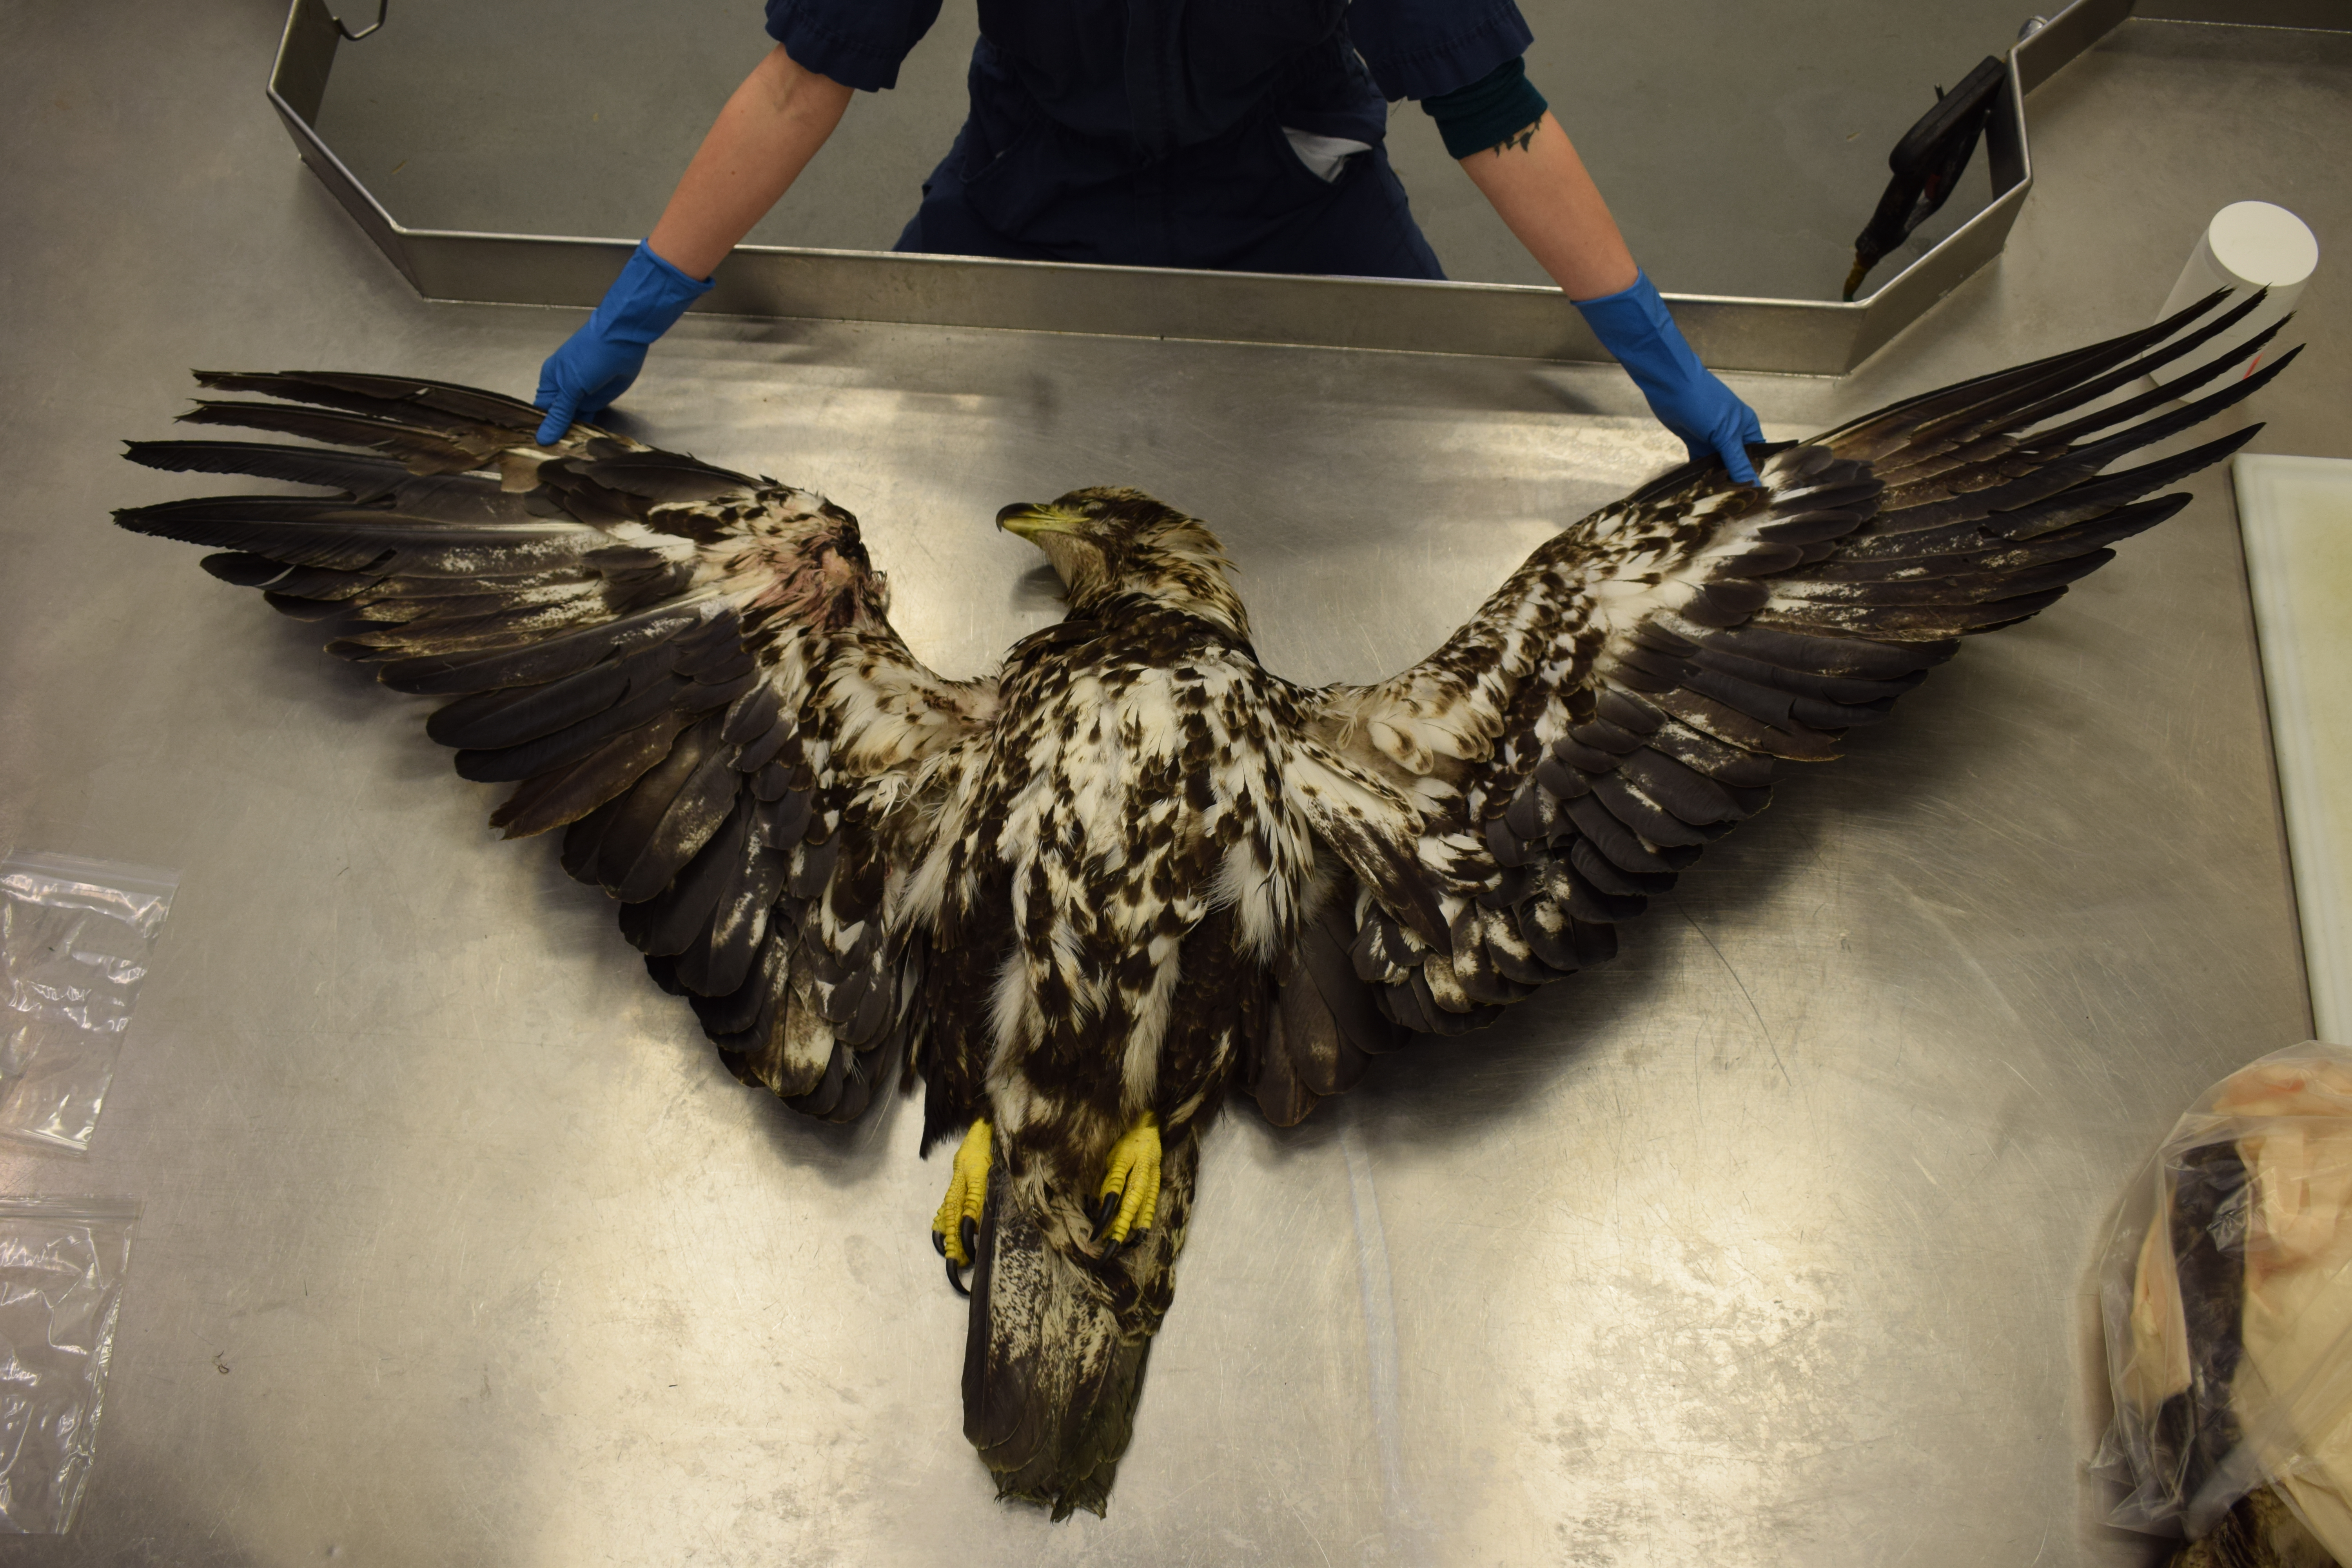 Juvenile bald eagle submitted for necropsy